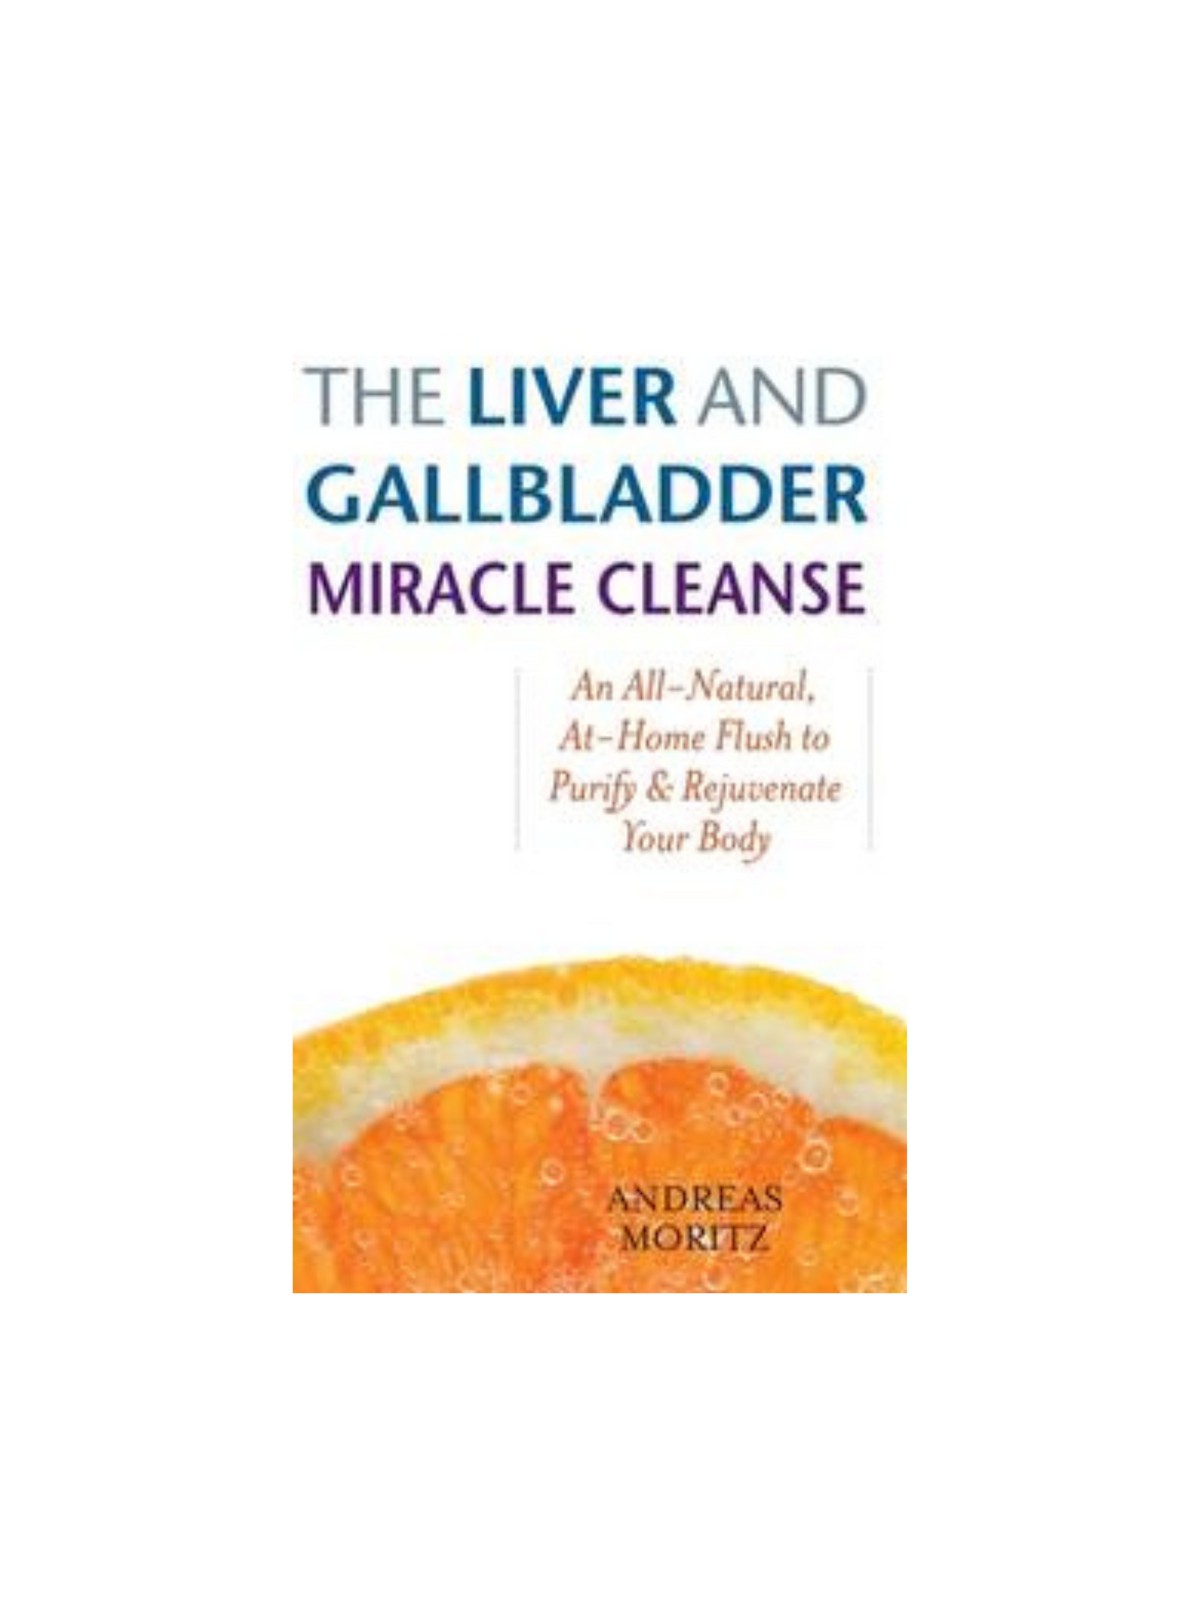 The Liver and Gallbladder Miracle Cleanse Book